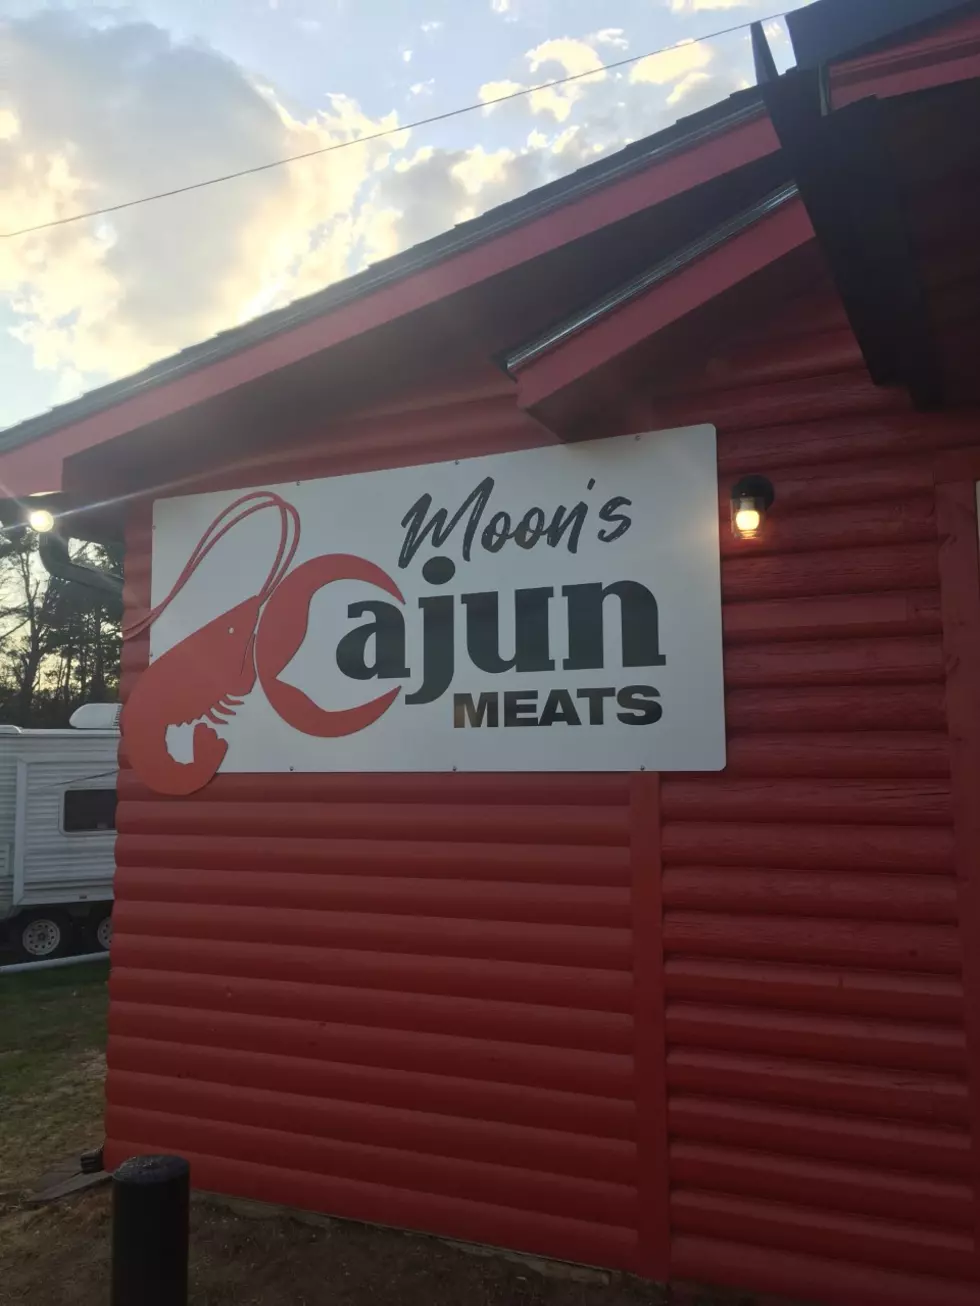 It&#8217;s Official! Moon&#8217;s Cajun Meats Is Now Open In Nacogdoches!